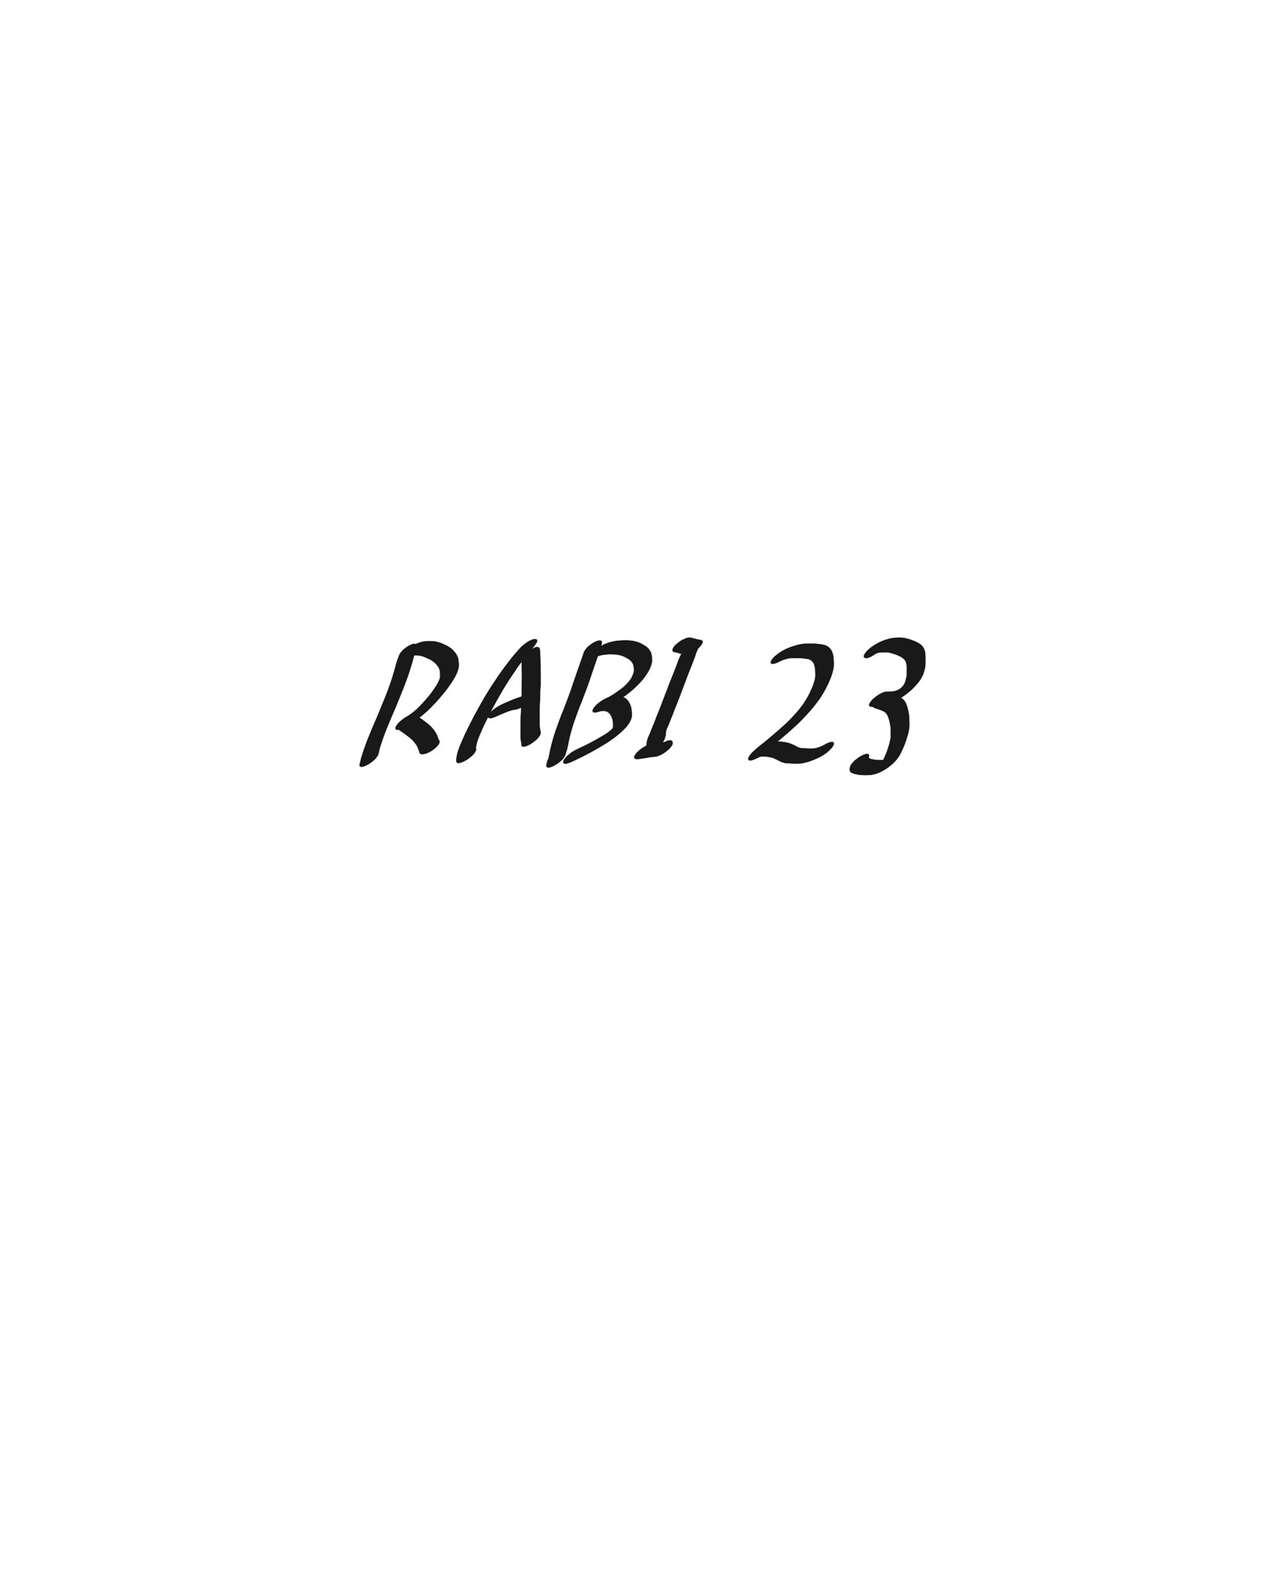 She rabi23 Housewife - Picture 2